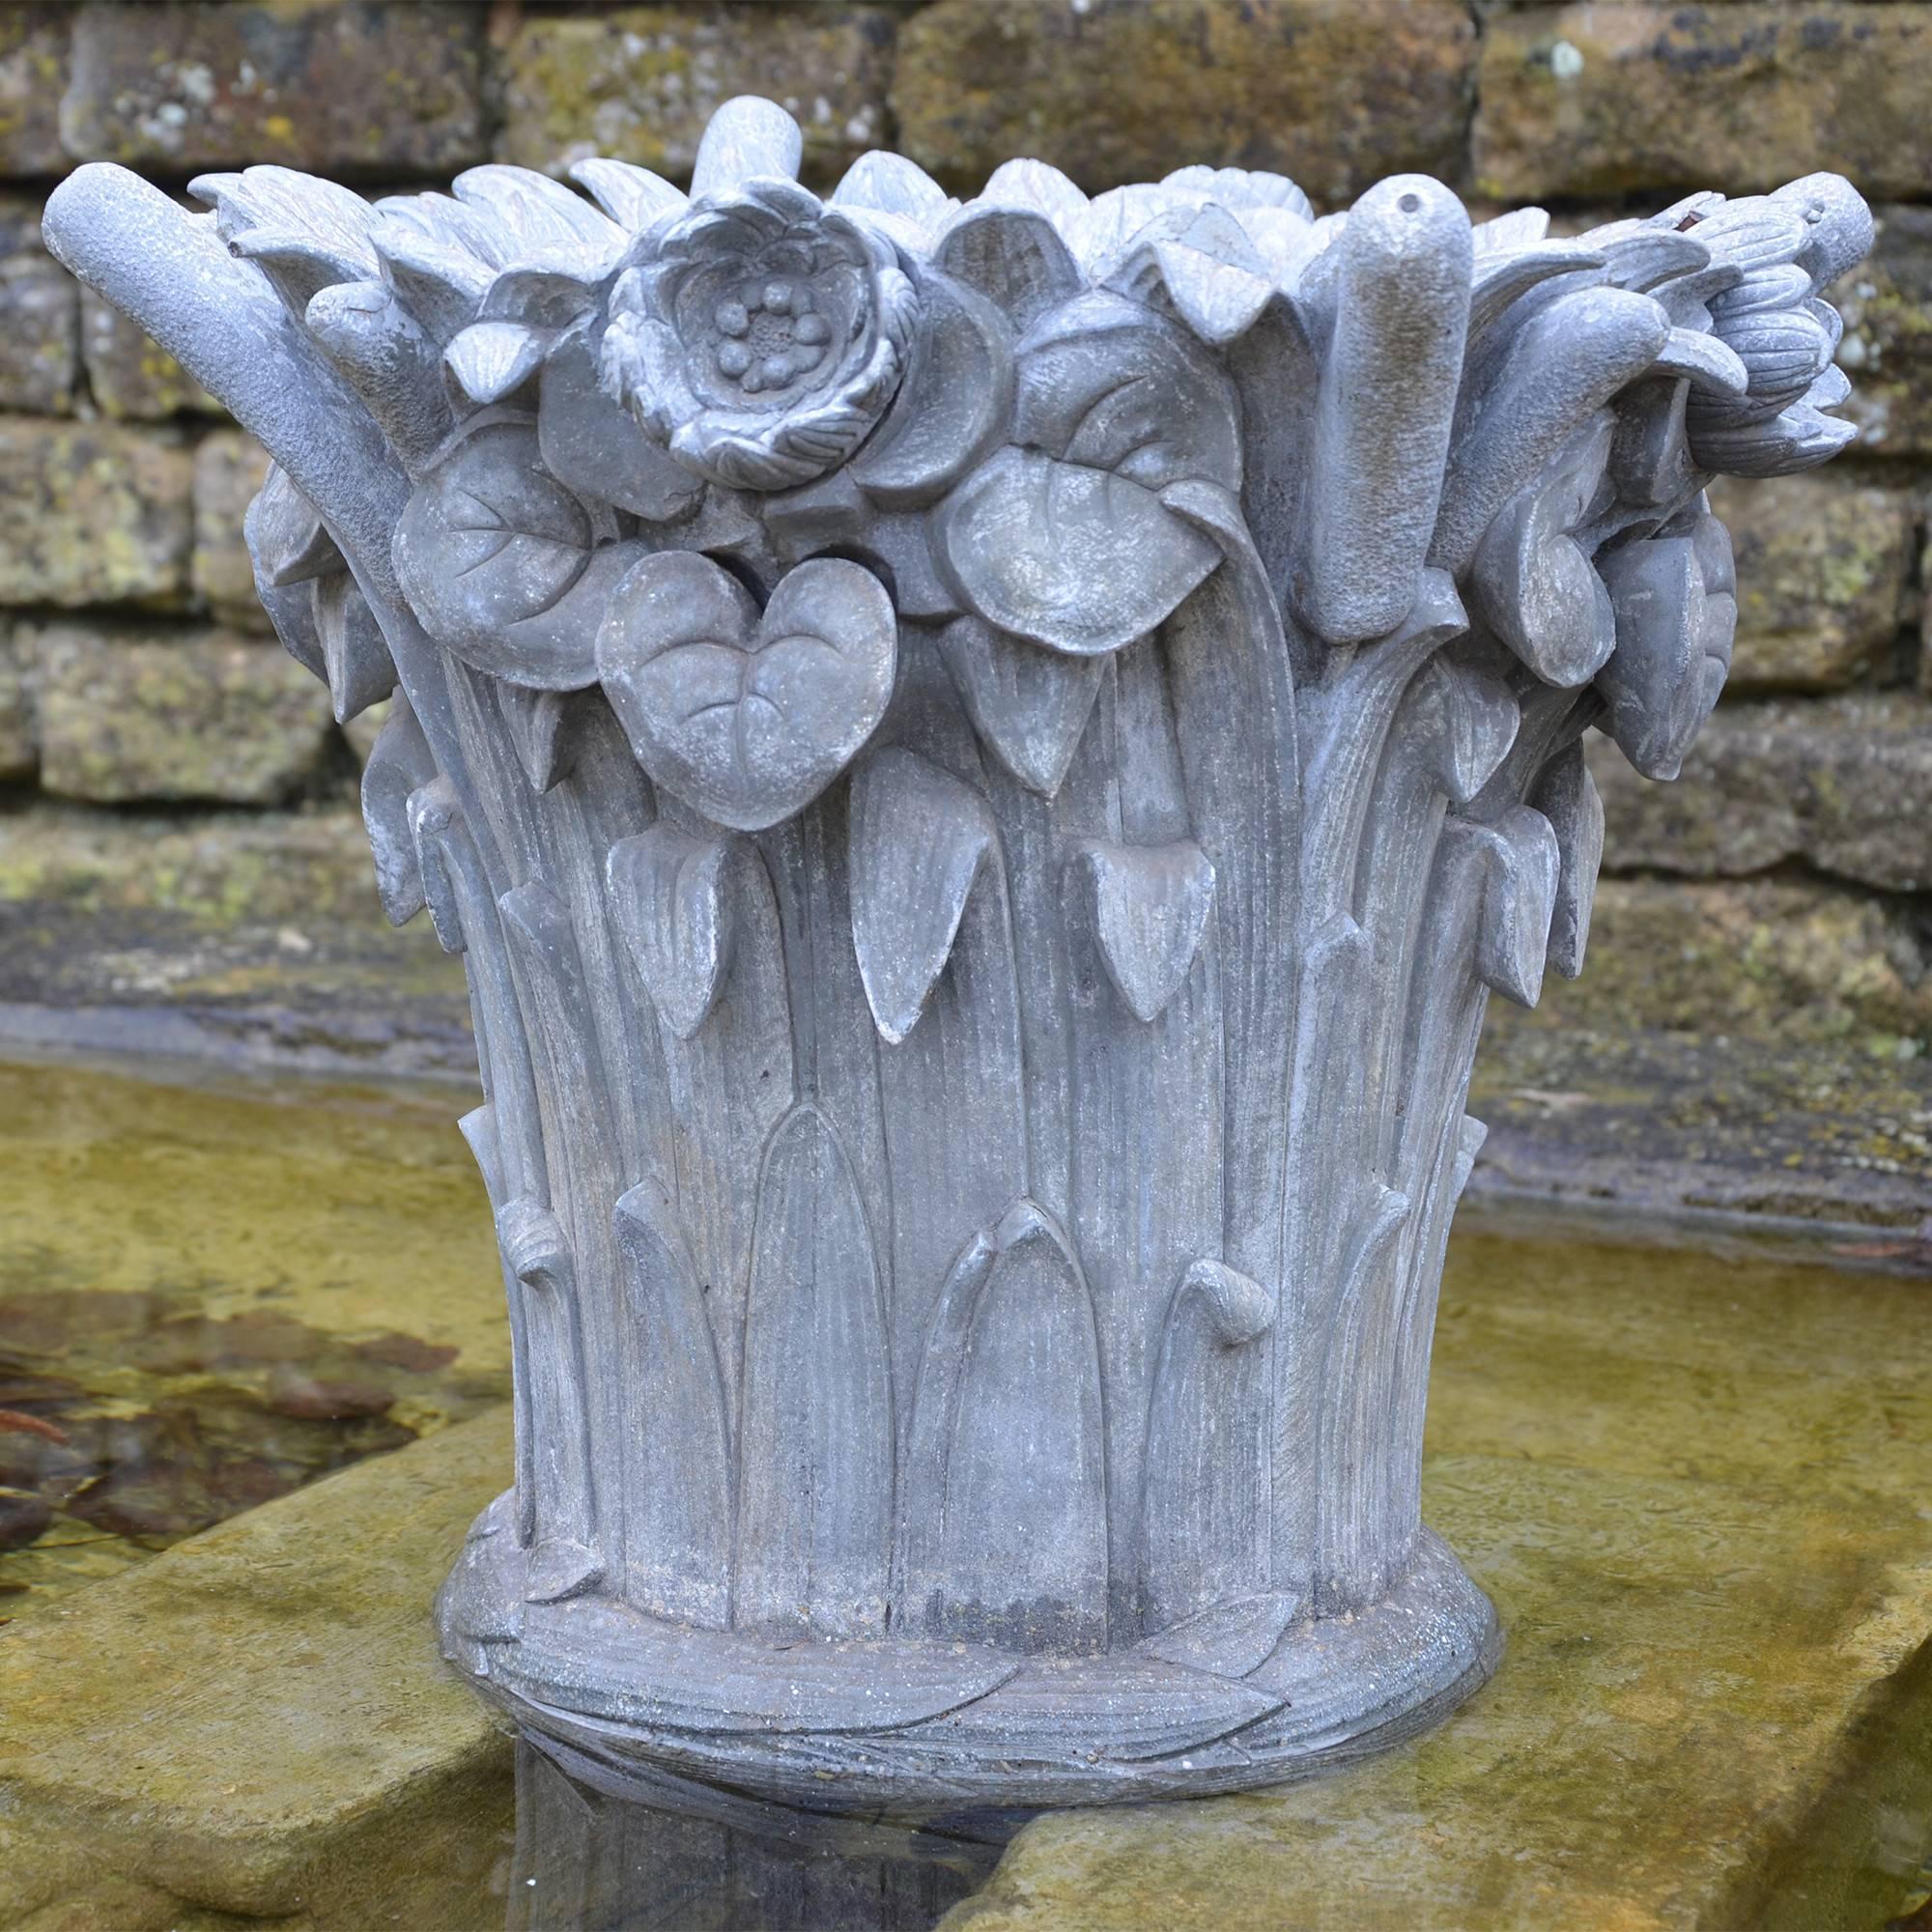 Of circular form embellished in the cast with reed bulrush and lily ornament. This fountain was probably a late cast from the famous Val D'Osne Foundry just north of Paris.